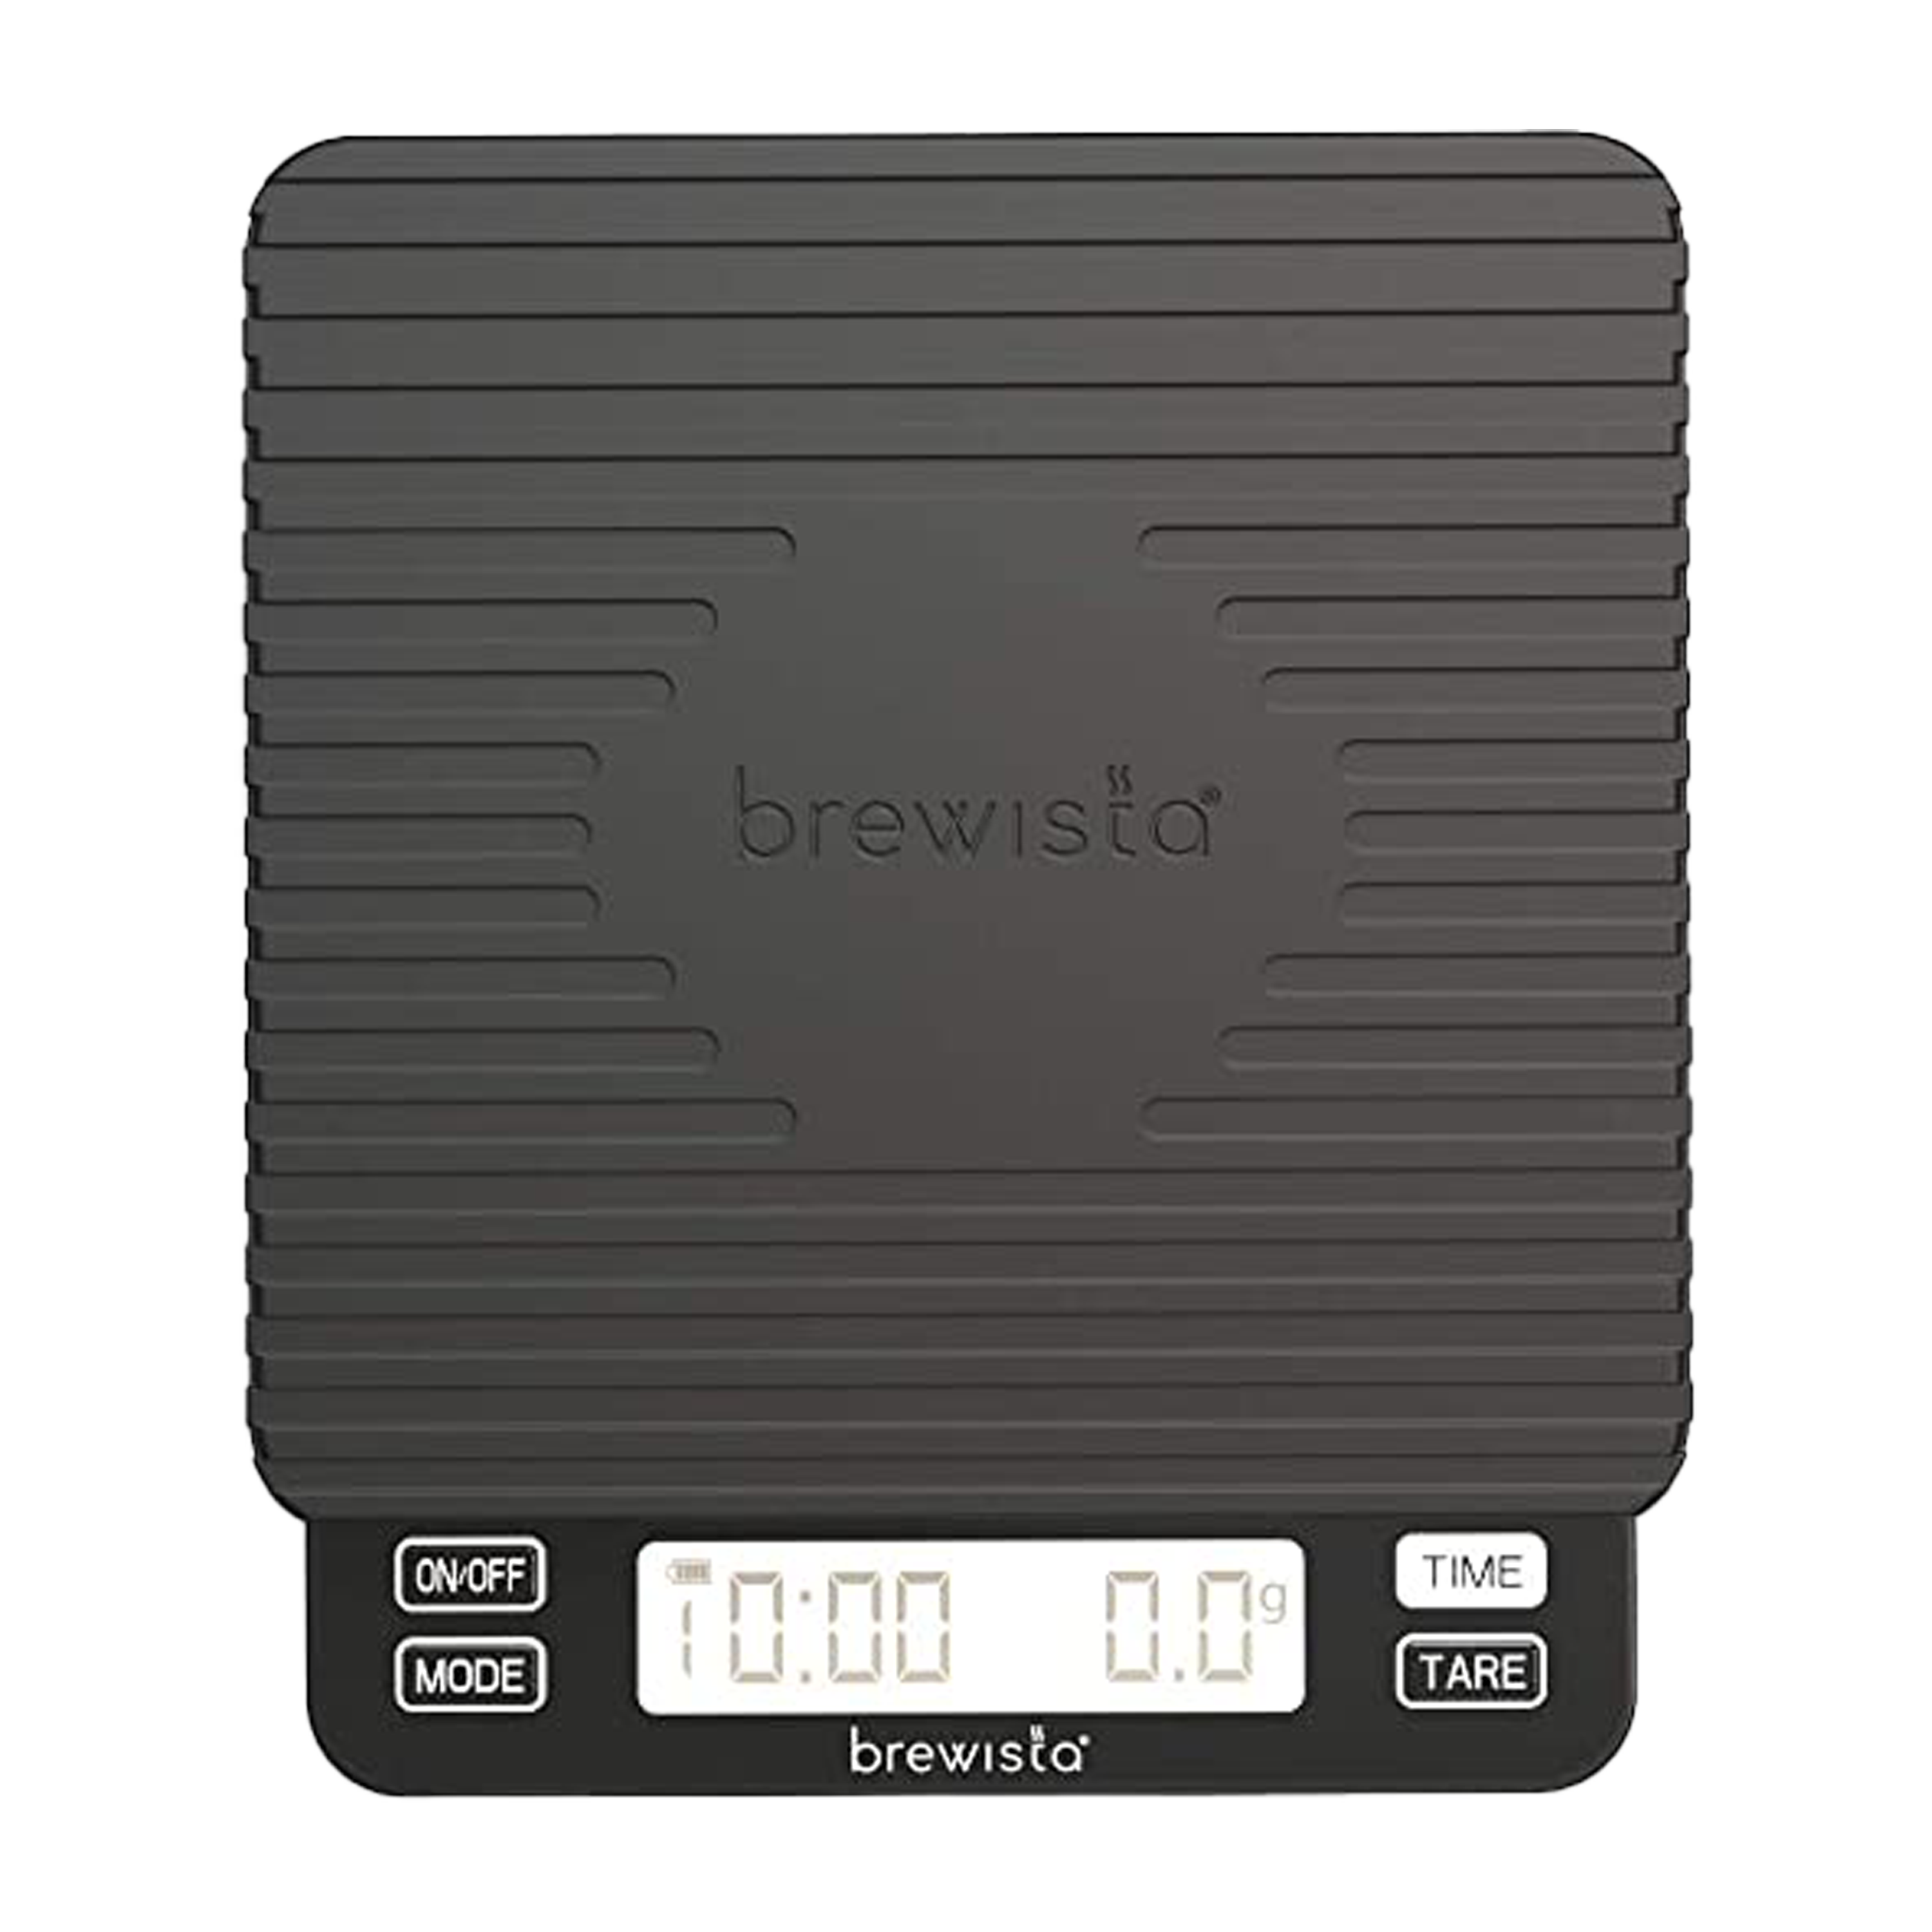 Brewista Smart Scale II Disassembly - iFixit Repair Guide